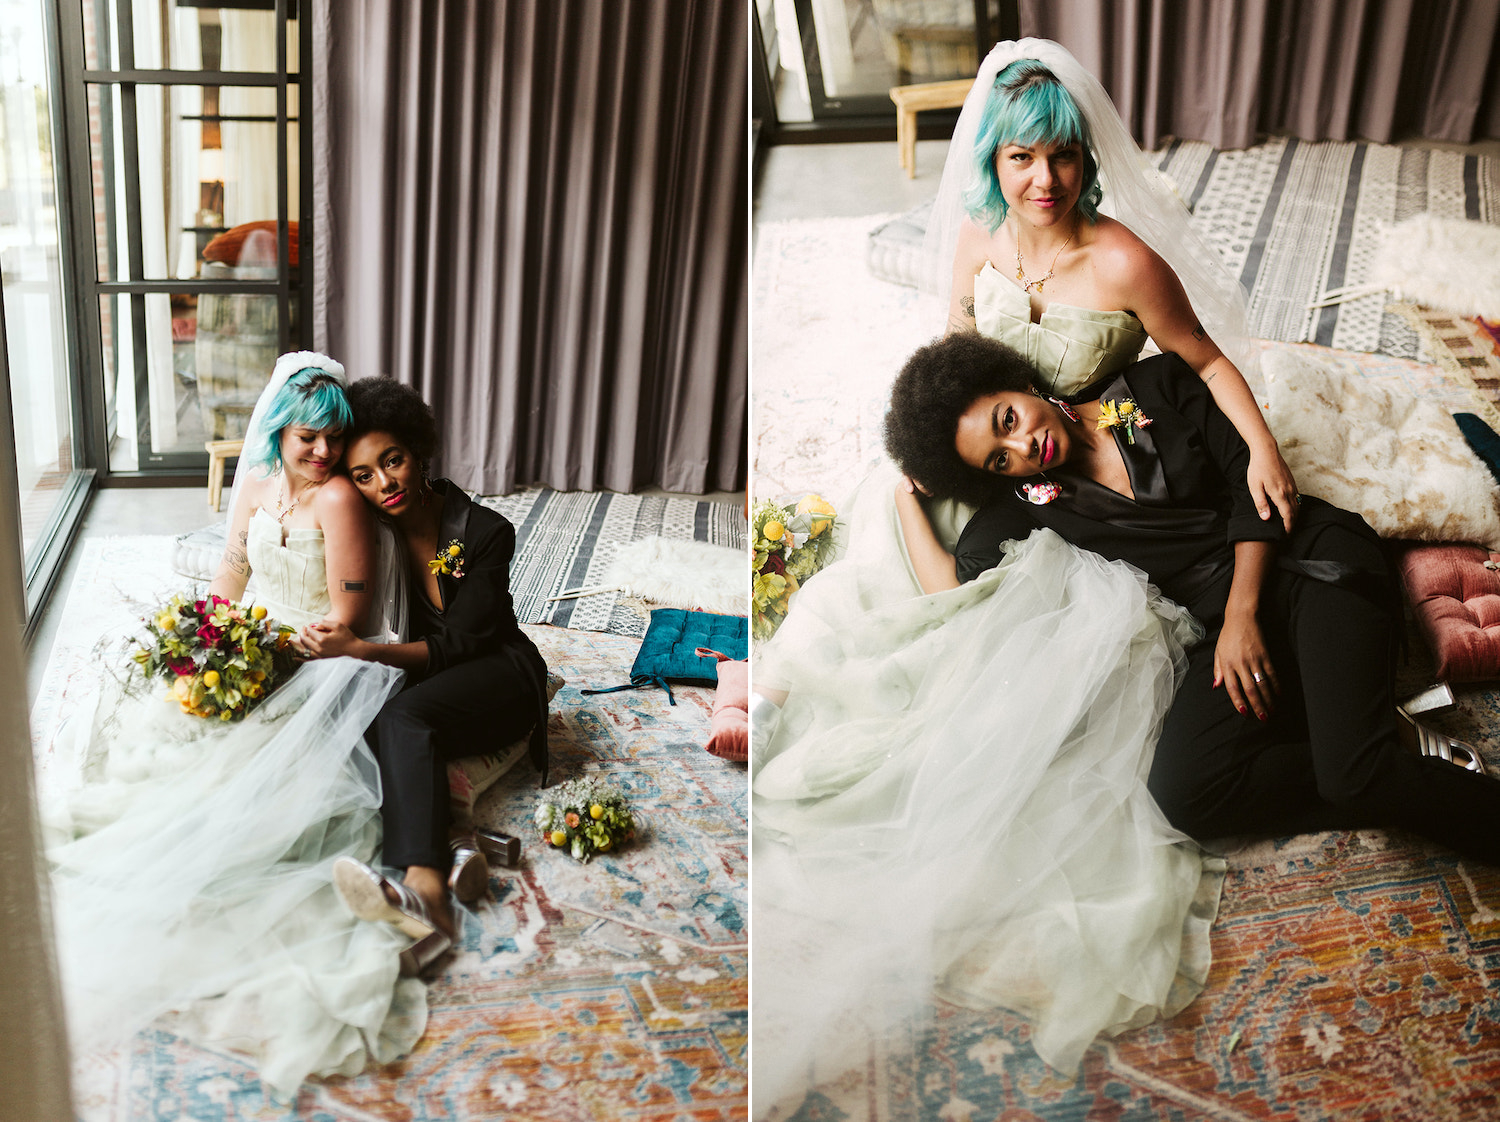 lesbian couple in strapless gown and black pantsuit cuddles on colorful pillows at Moxy Hotel at LGBTQ Wedding in Chattanooga